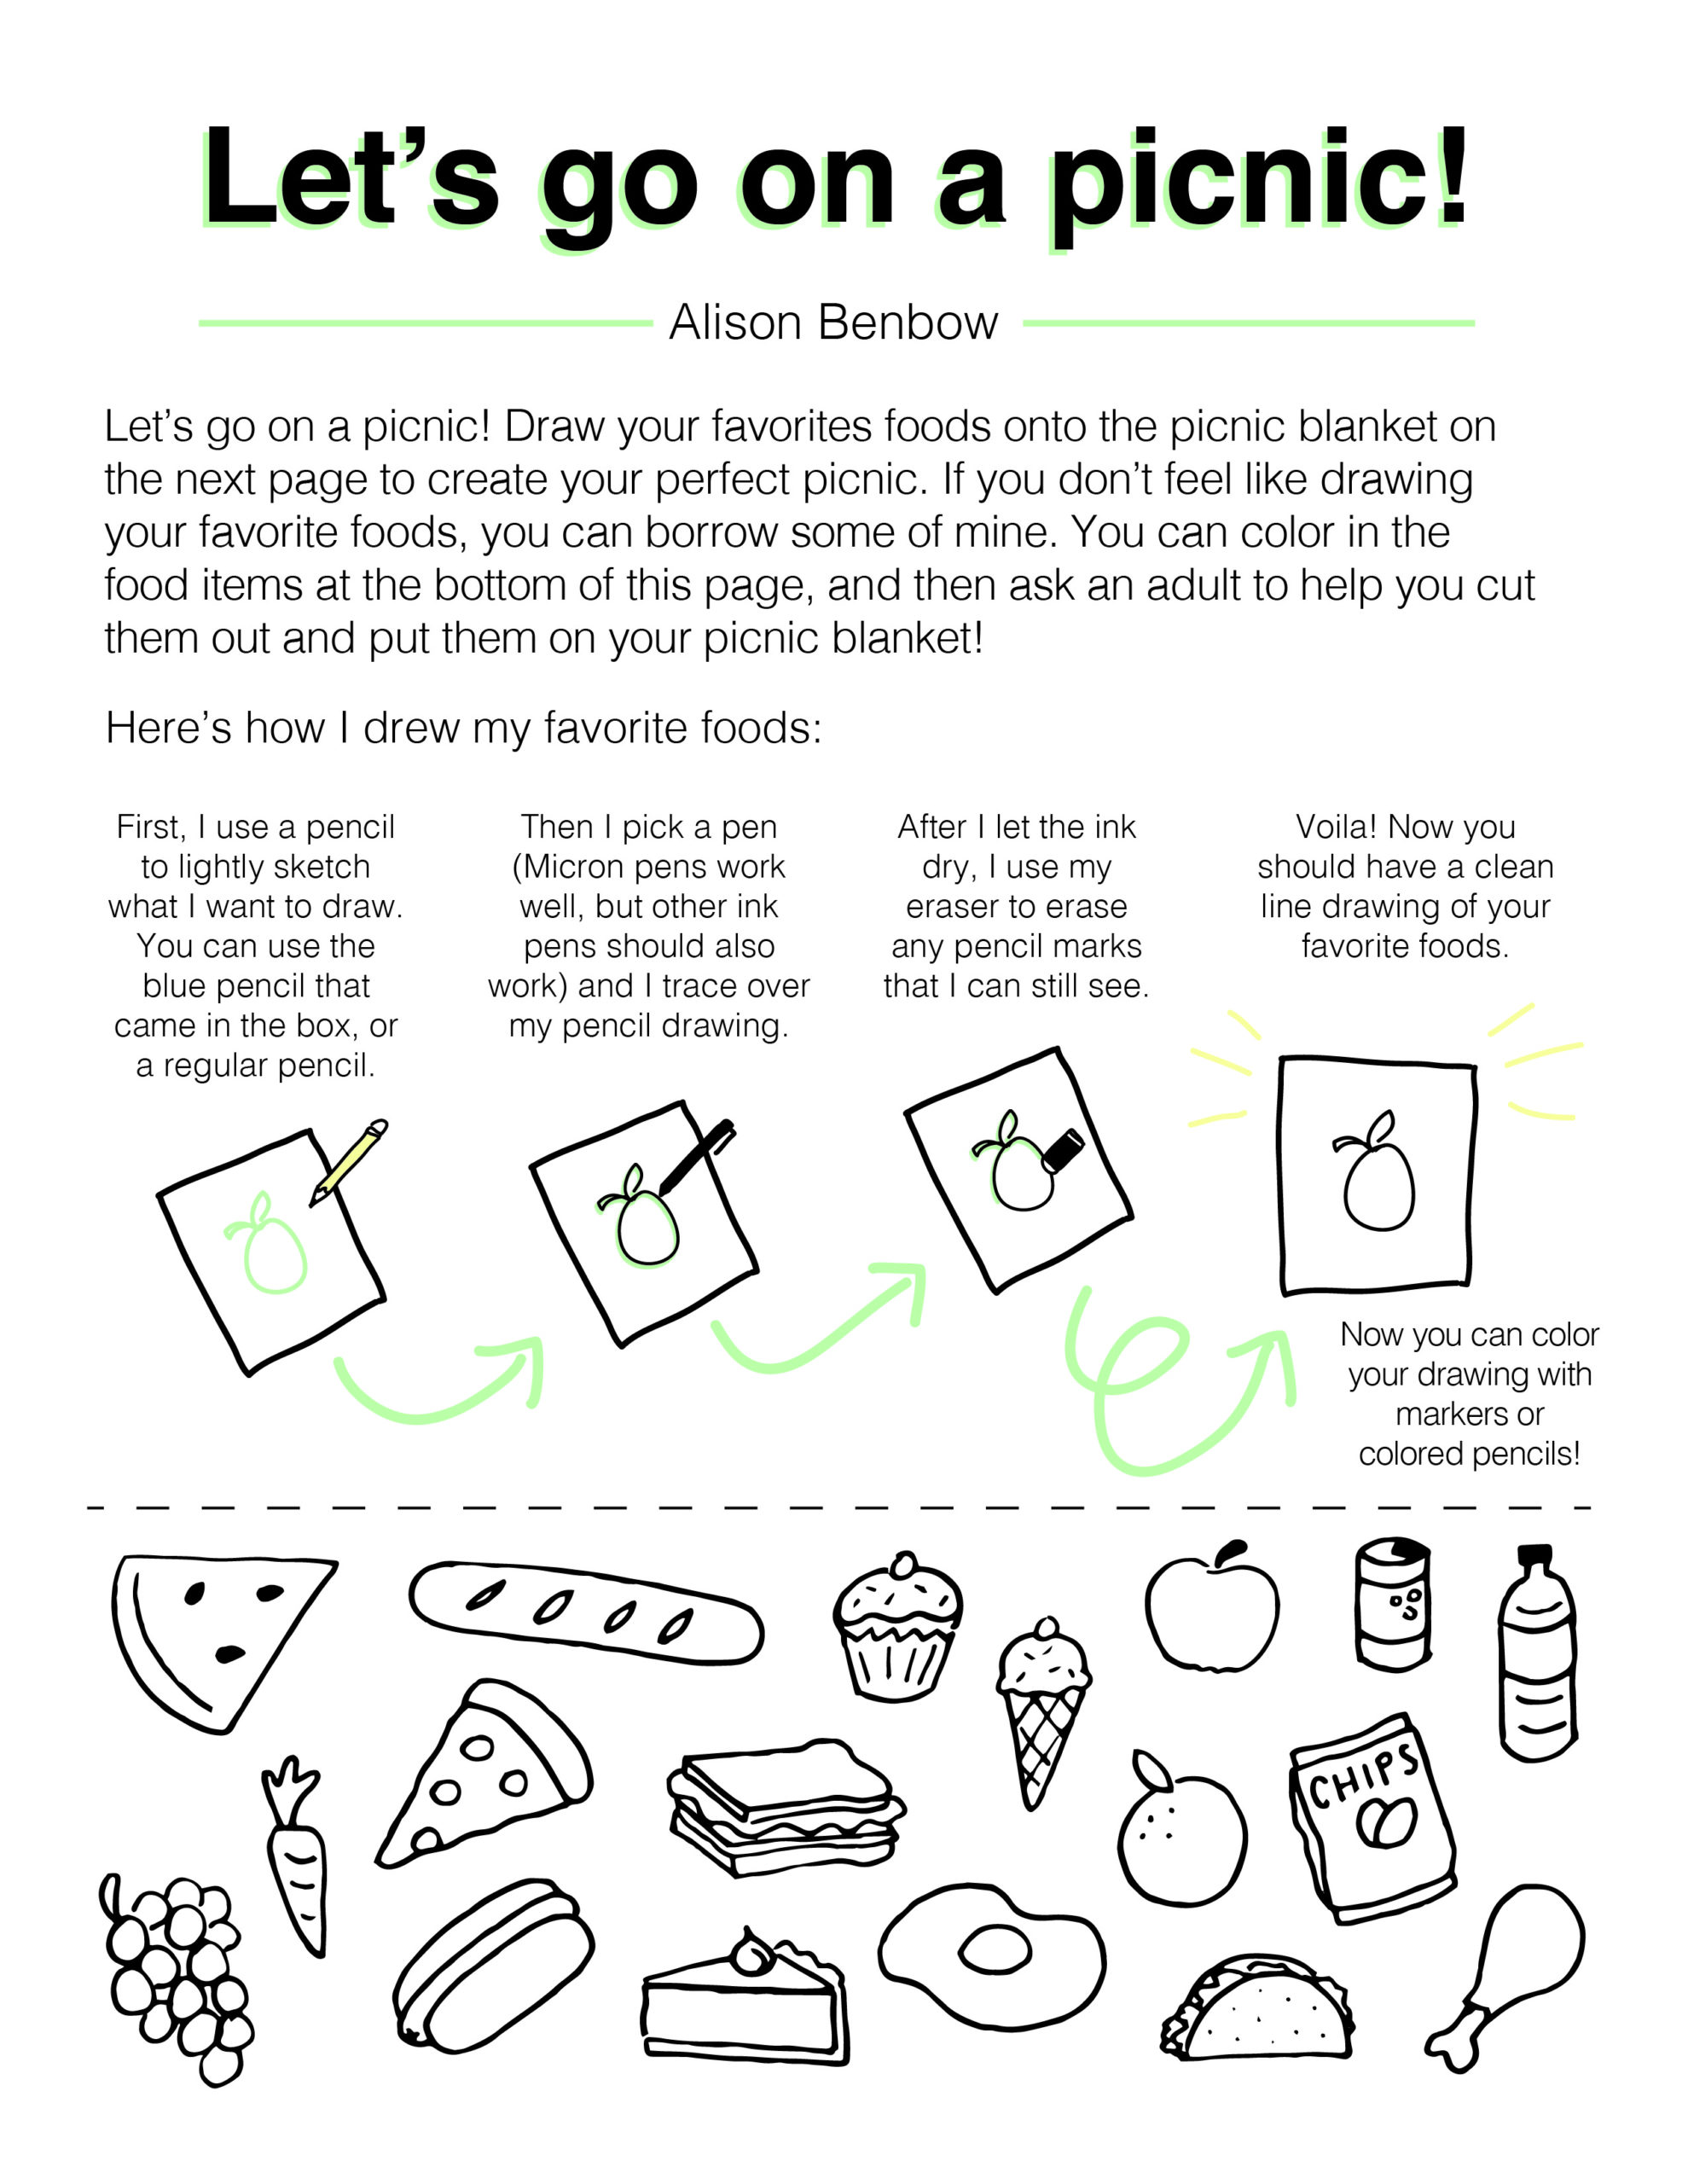 Image of the front page with text reading "let's go on a picnic" and line drawings of food